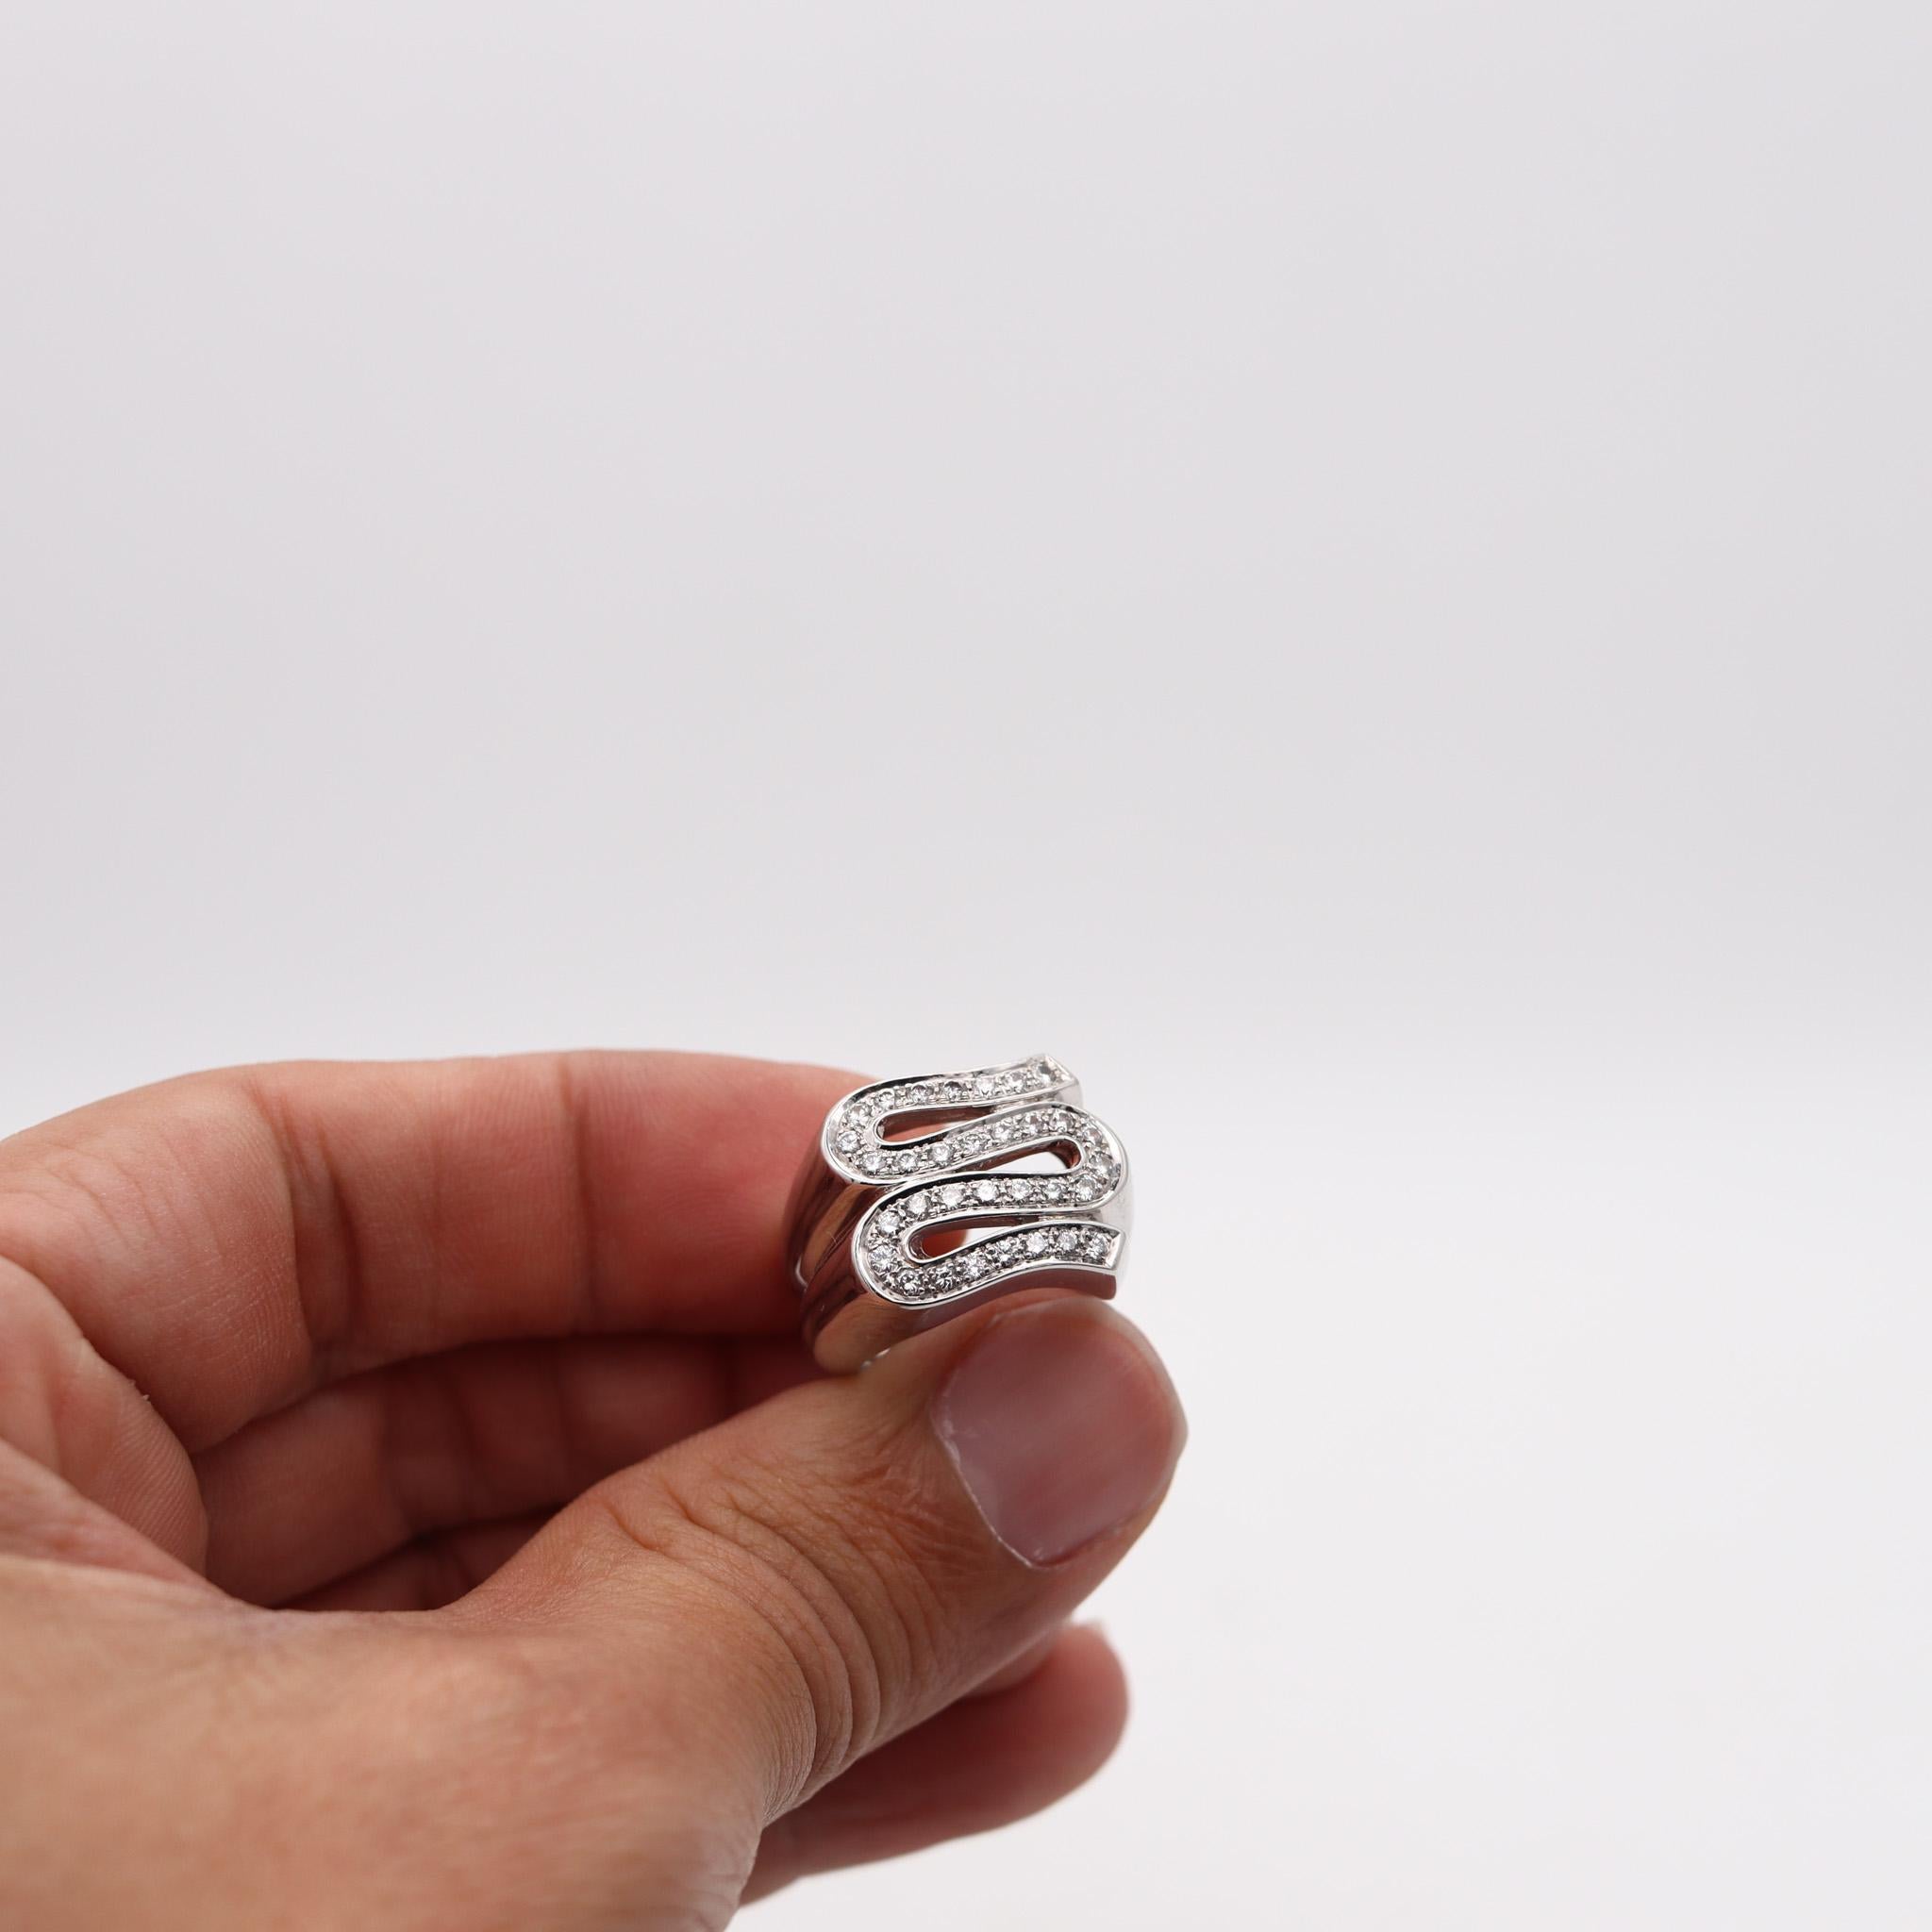 Gianni Versace 1990 Cocktail Ring In 18Kt White Gold With 1.03 Ctw In Diamonds For Sale 1